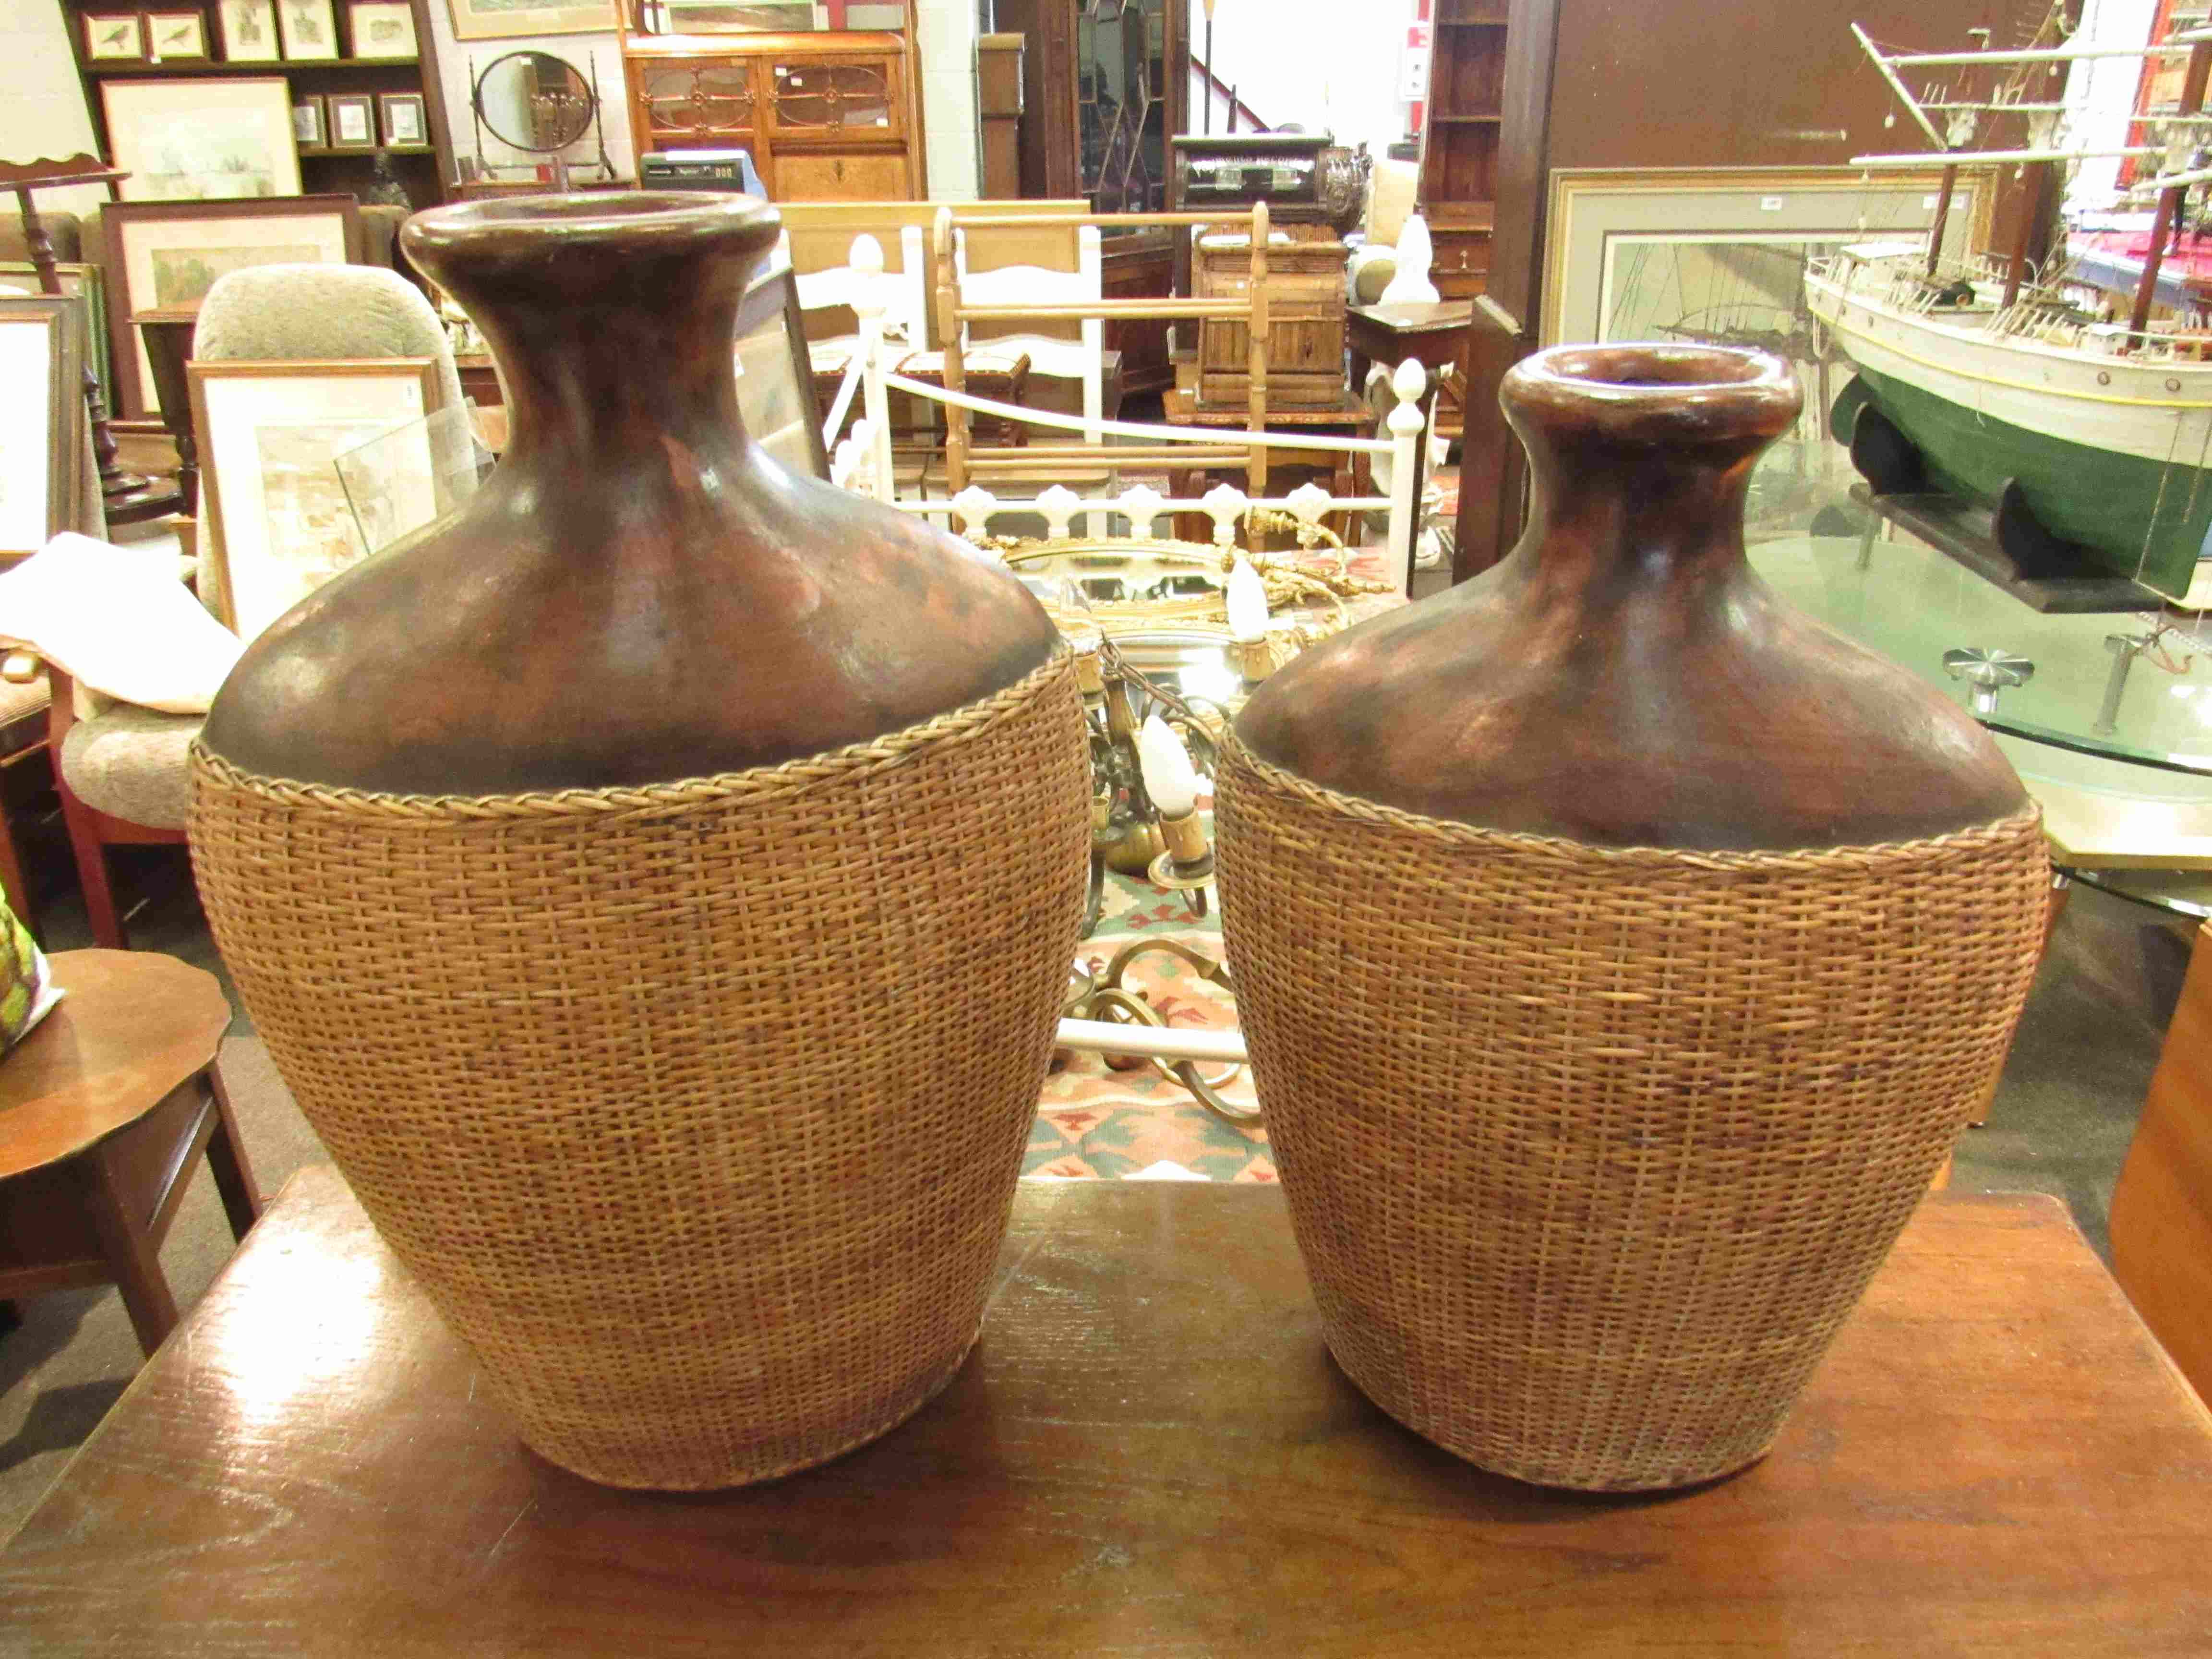 Two Egyptian style vases,